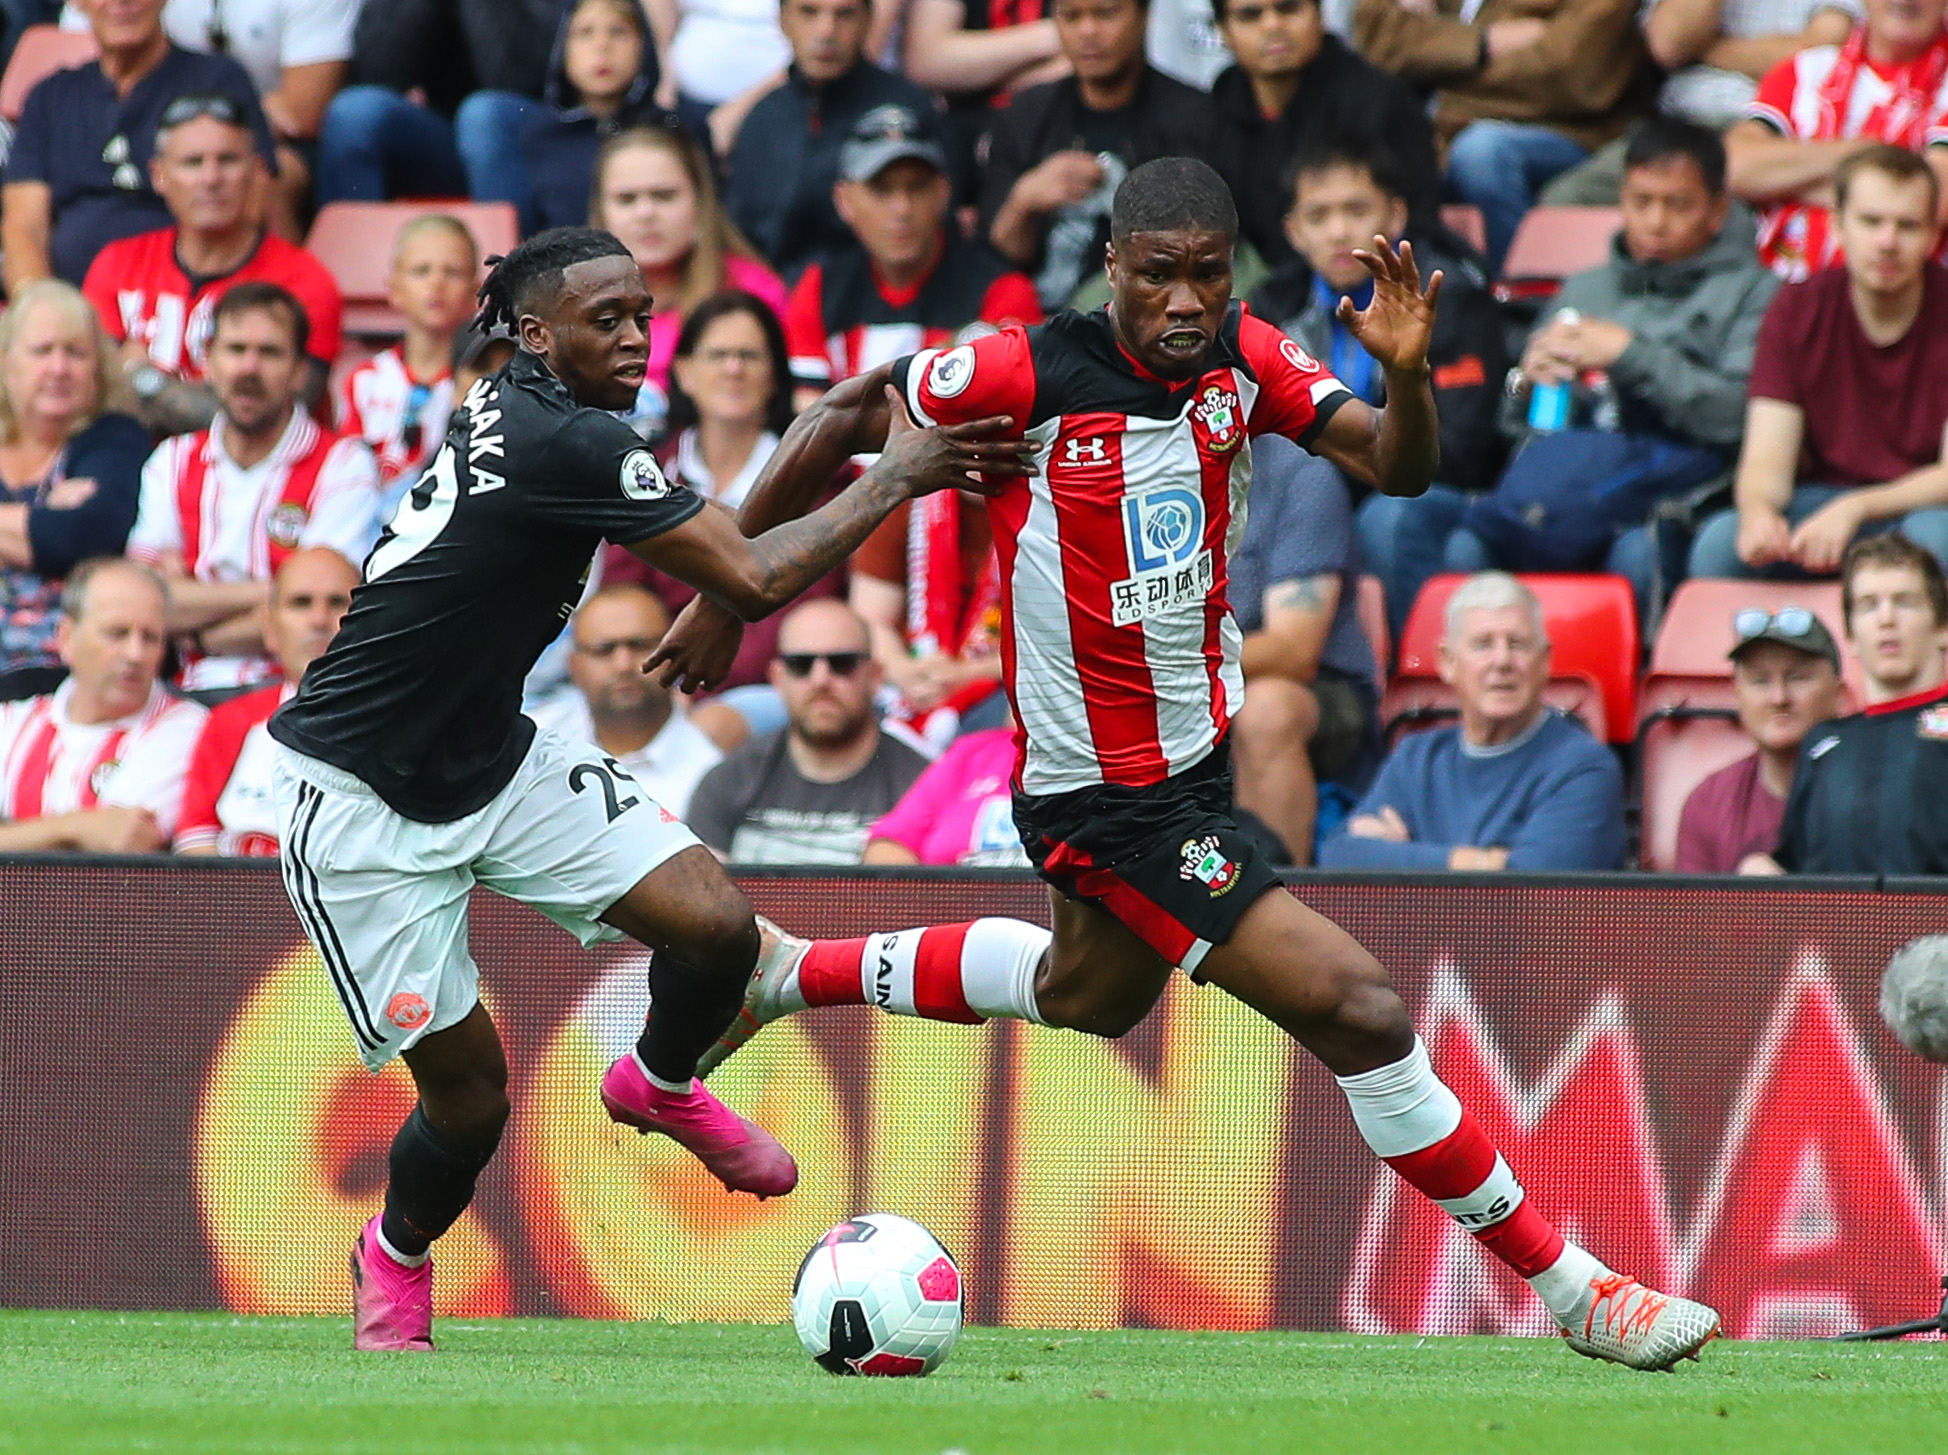 Southampton's Jannik Vestergaard backs Kevin Danso to learn from red card - Daily Echo